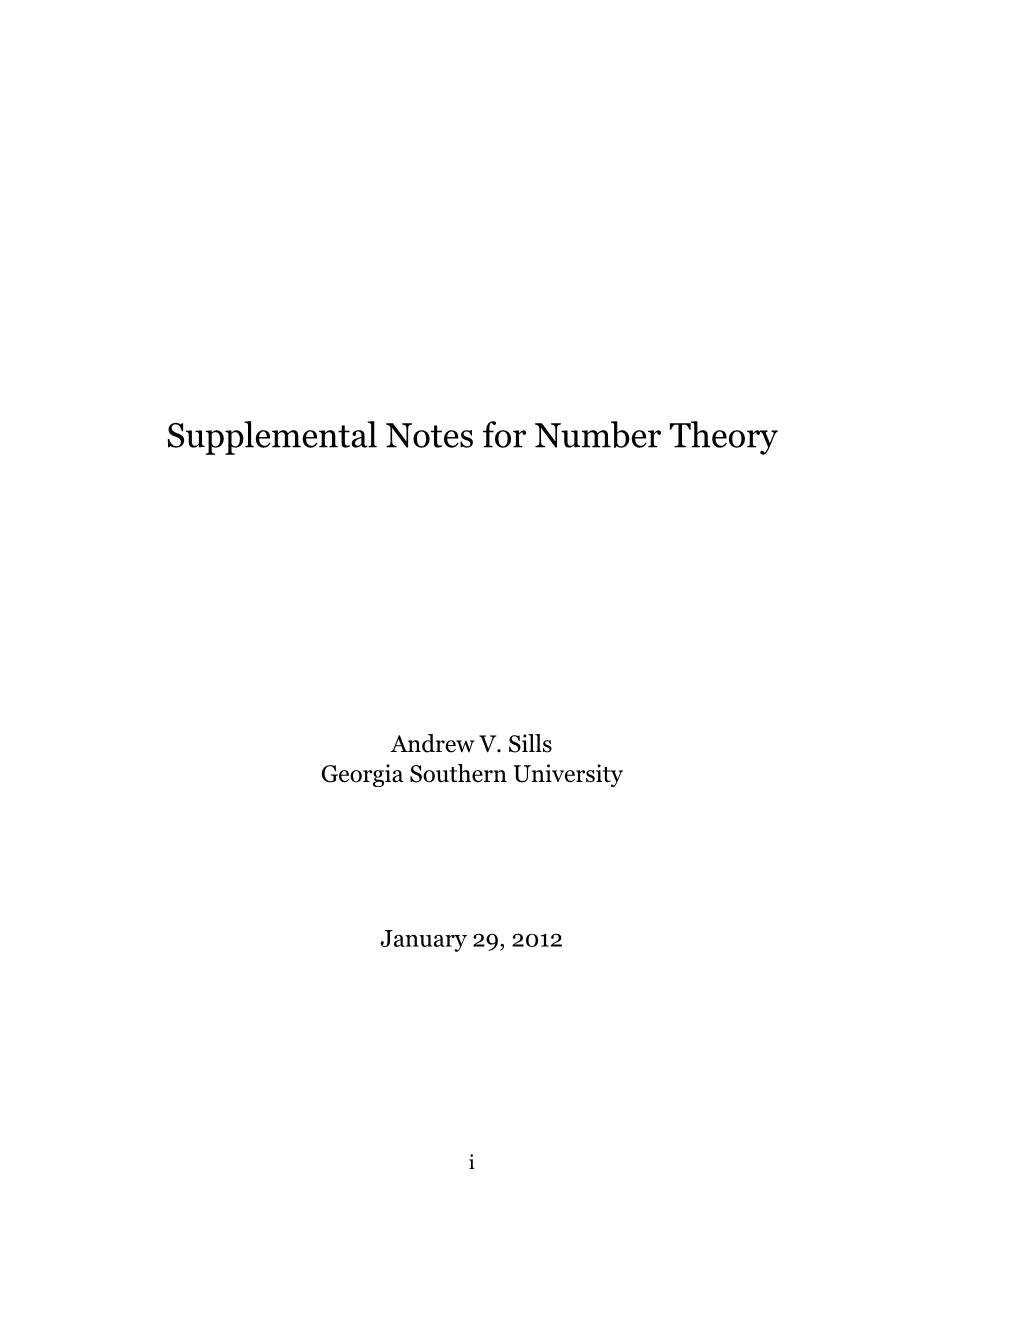 Supplemental Notes for Number Theory